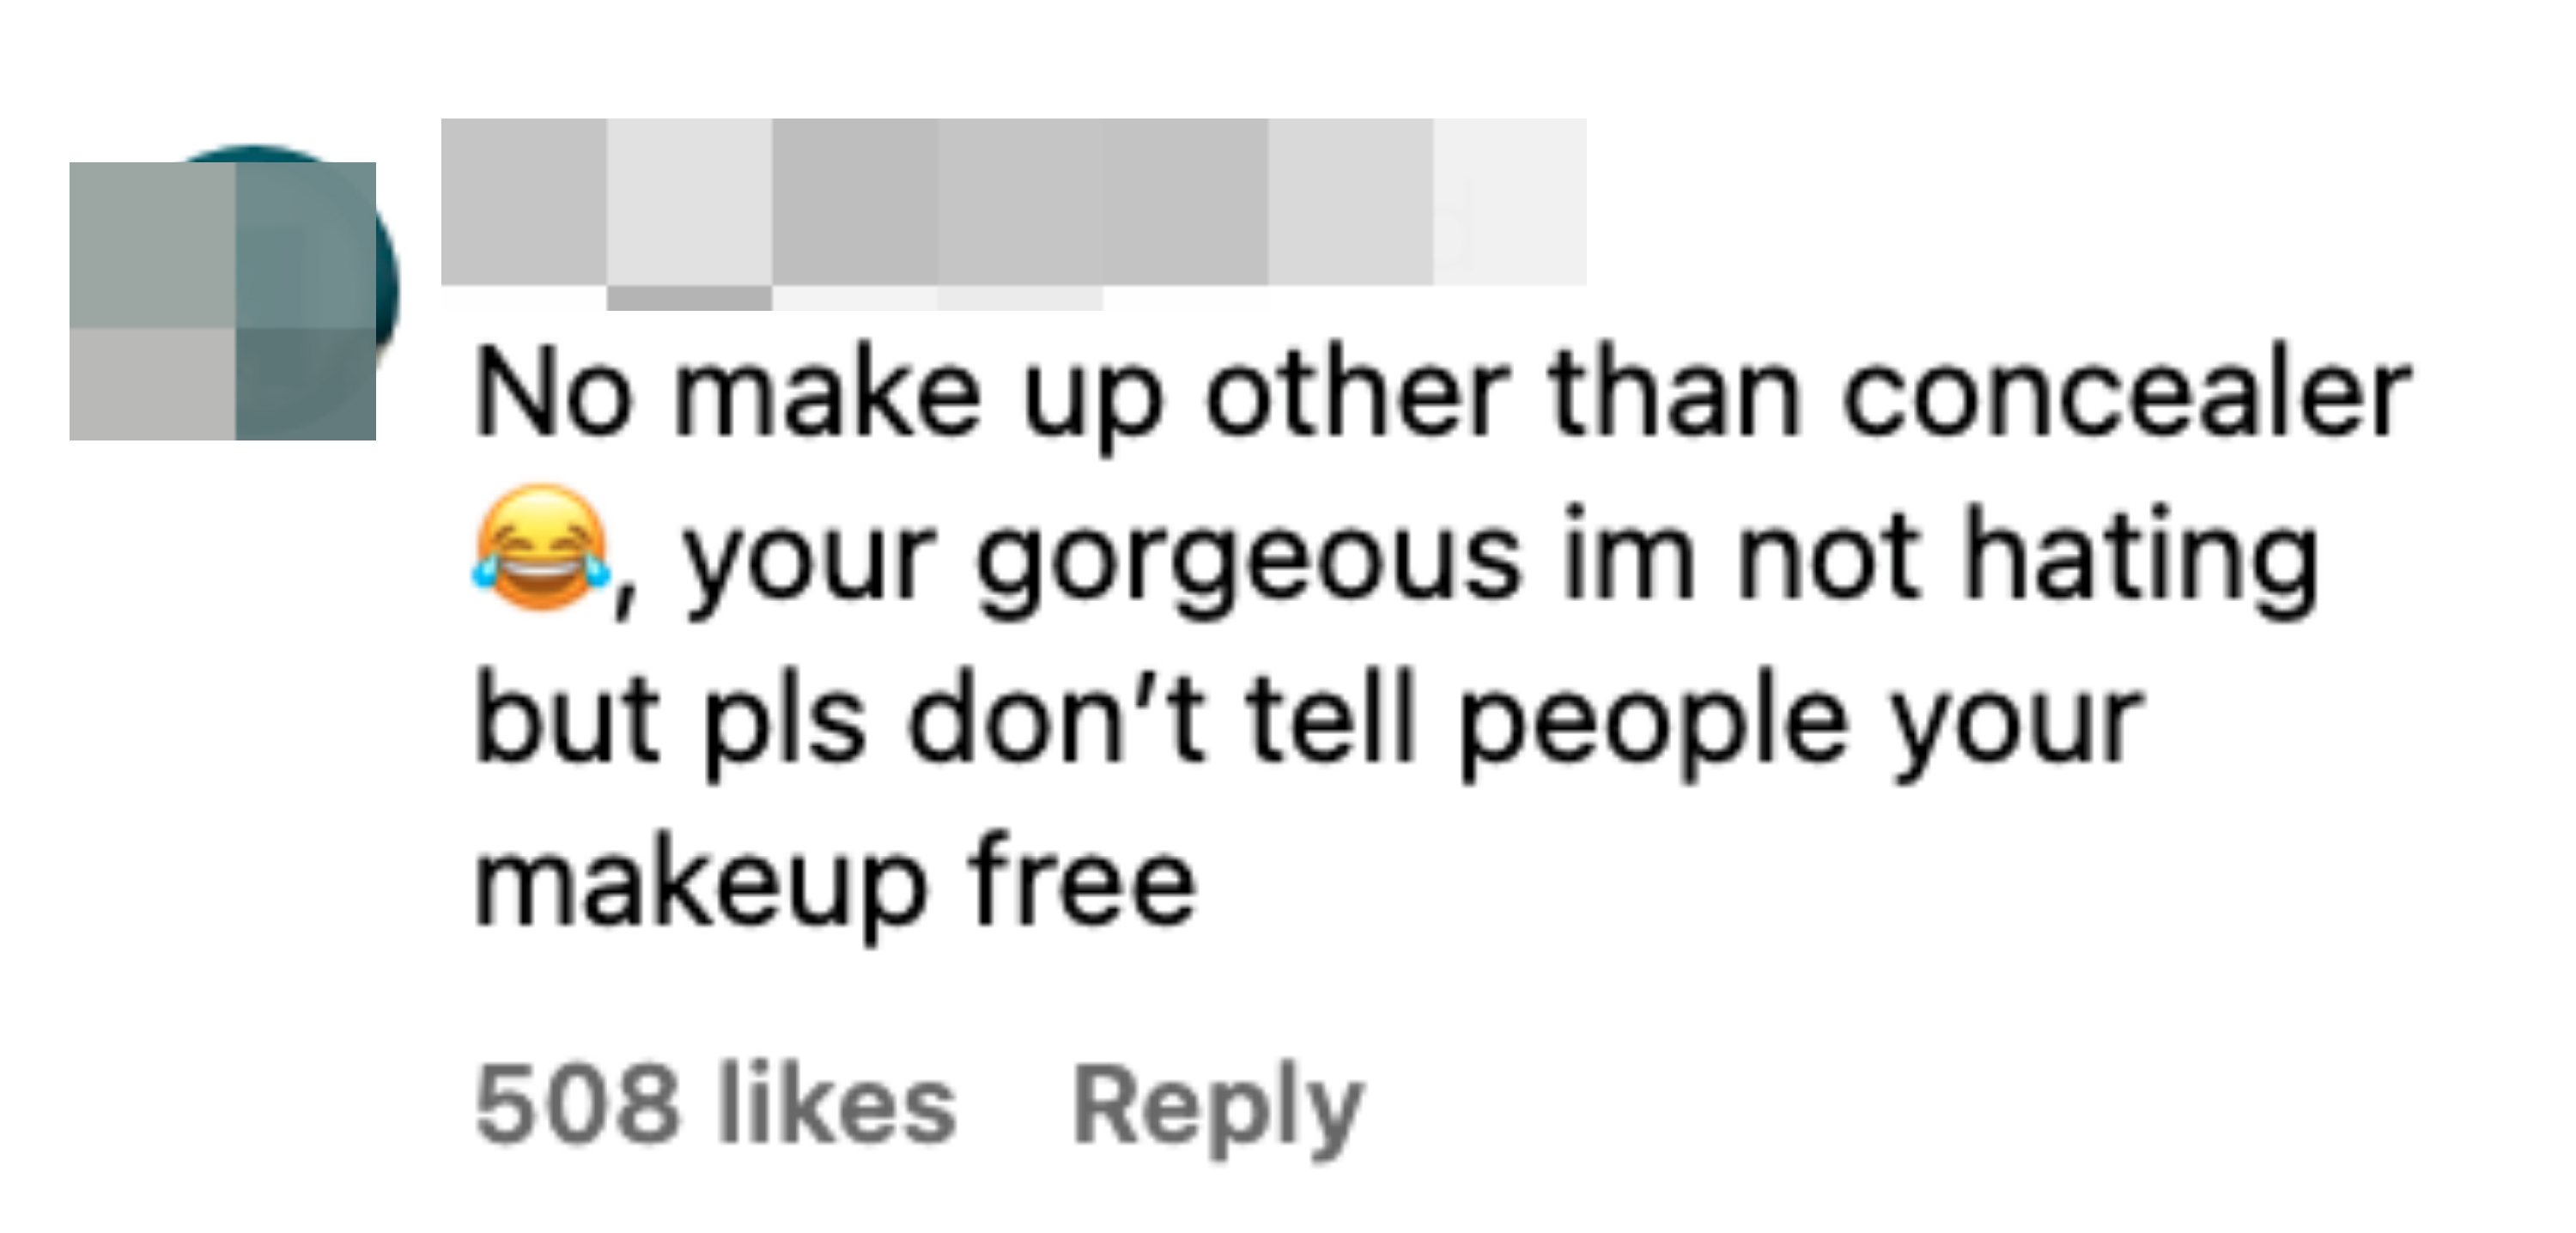 &quot;No make up other than concealer&quot;